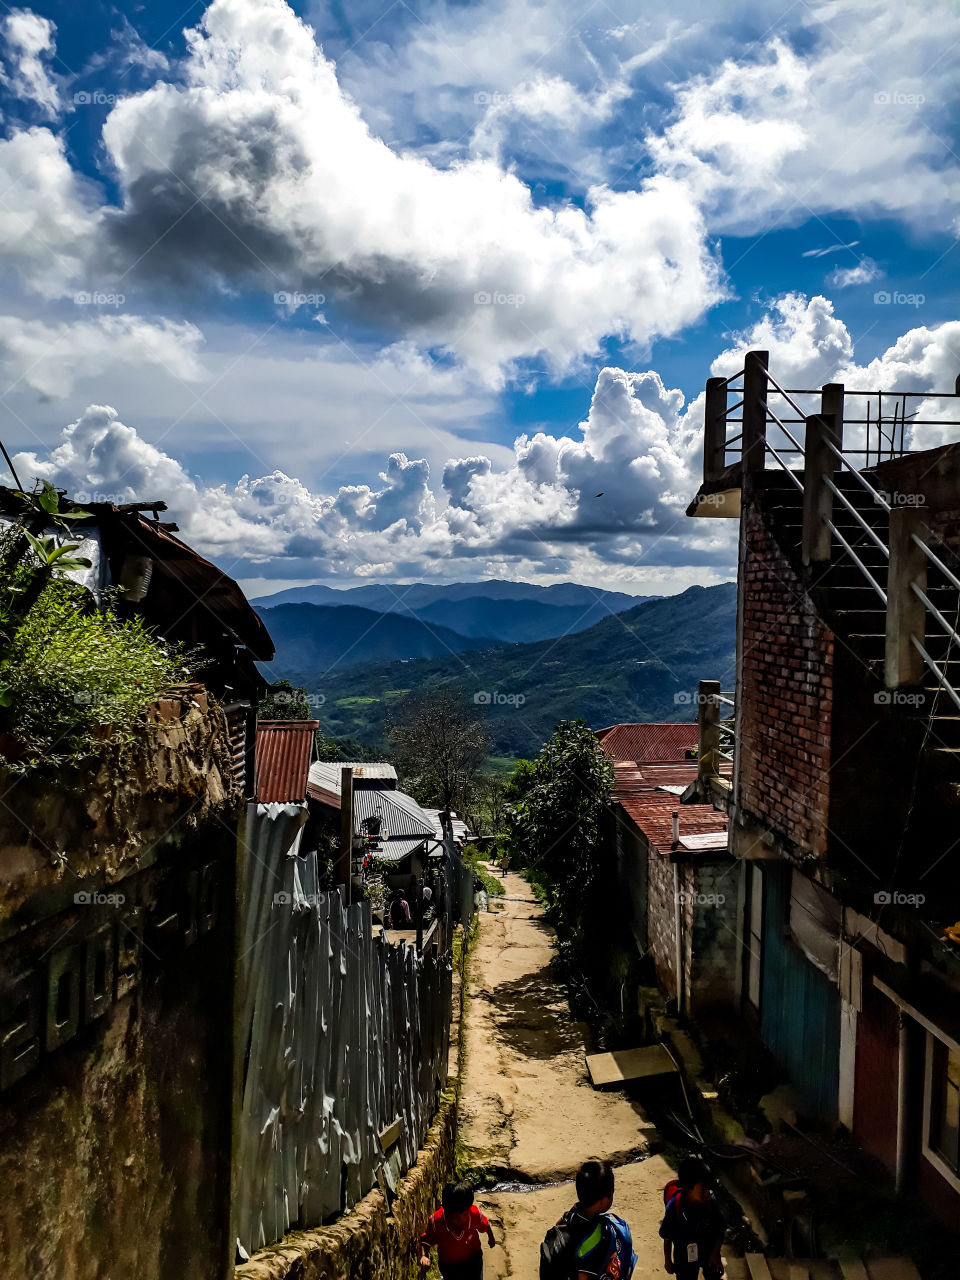 Just a glimpse of mother nature's beautiful creation through a narrow alley, in Ukhrul, Manipur, India